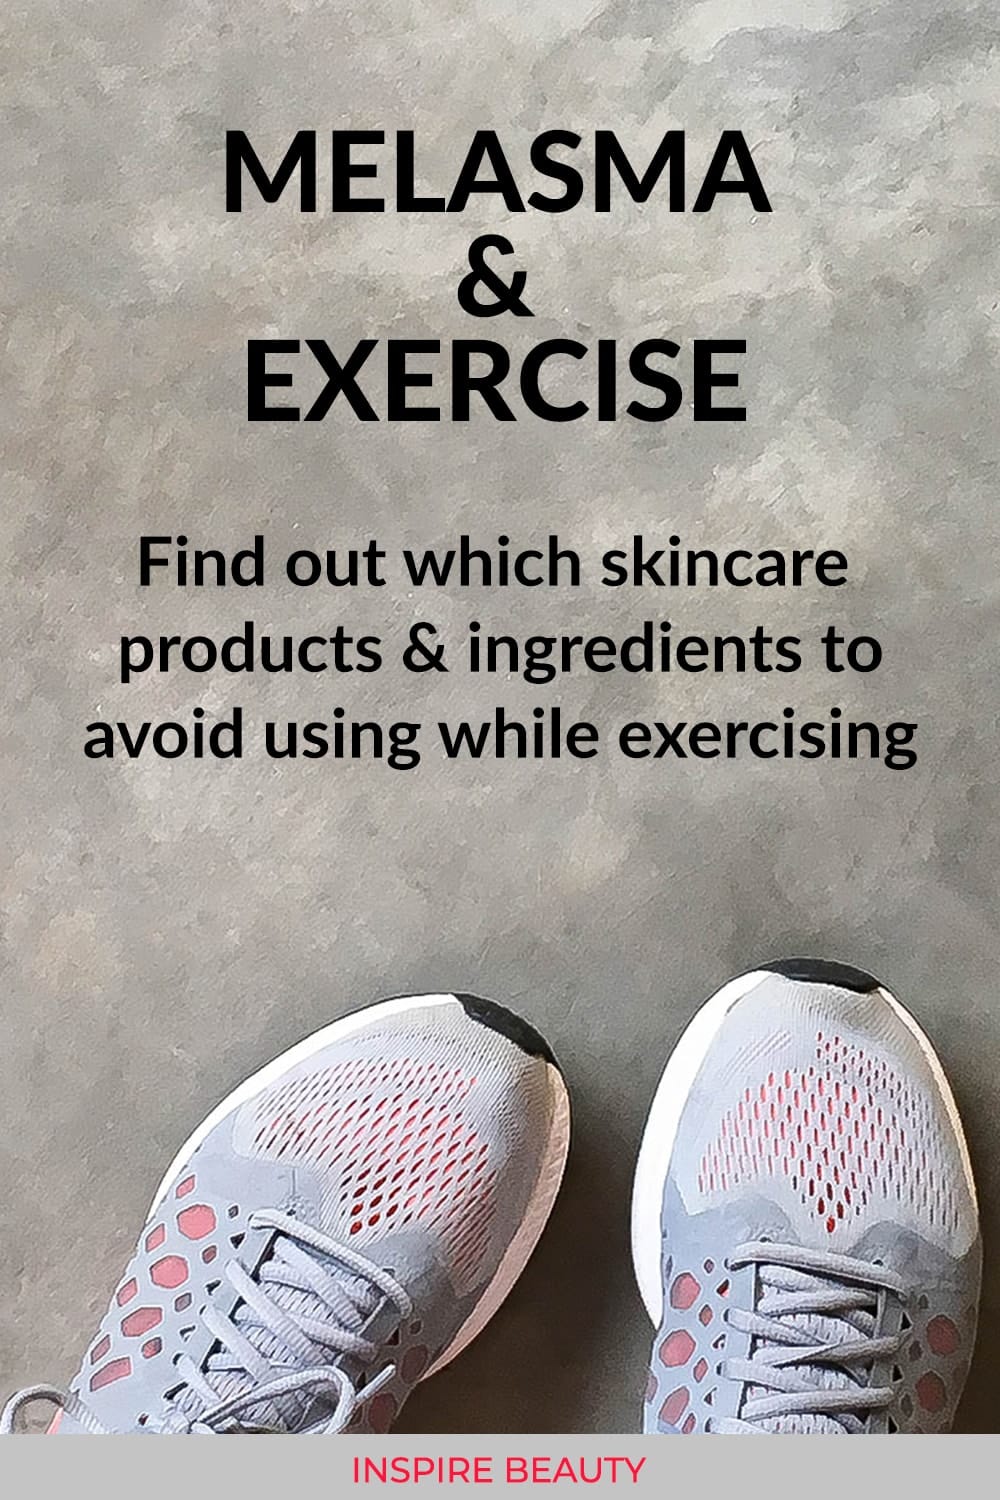 What skincare products and ingredients you should avoid using while you exercise if you have melasma